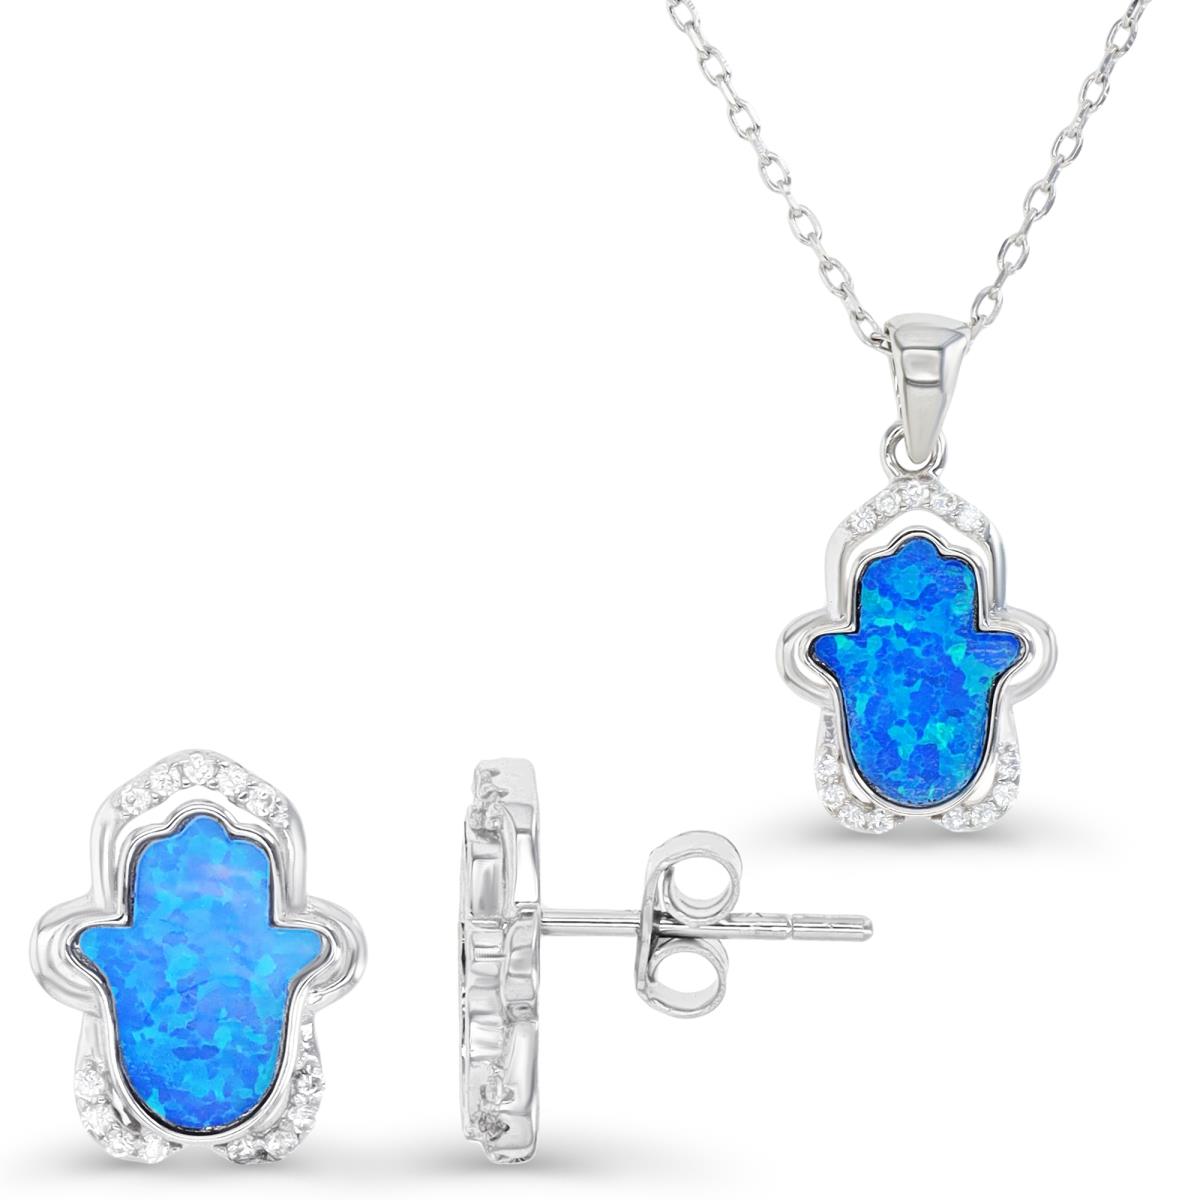 Sterling Silver Rhodium & Cr. Blue Opal and Cr. White Sapphire Hamsa Earrings and Necklace Set